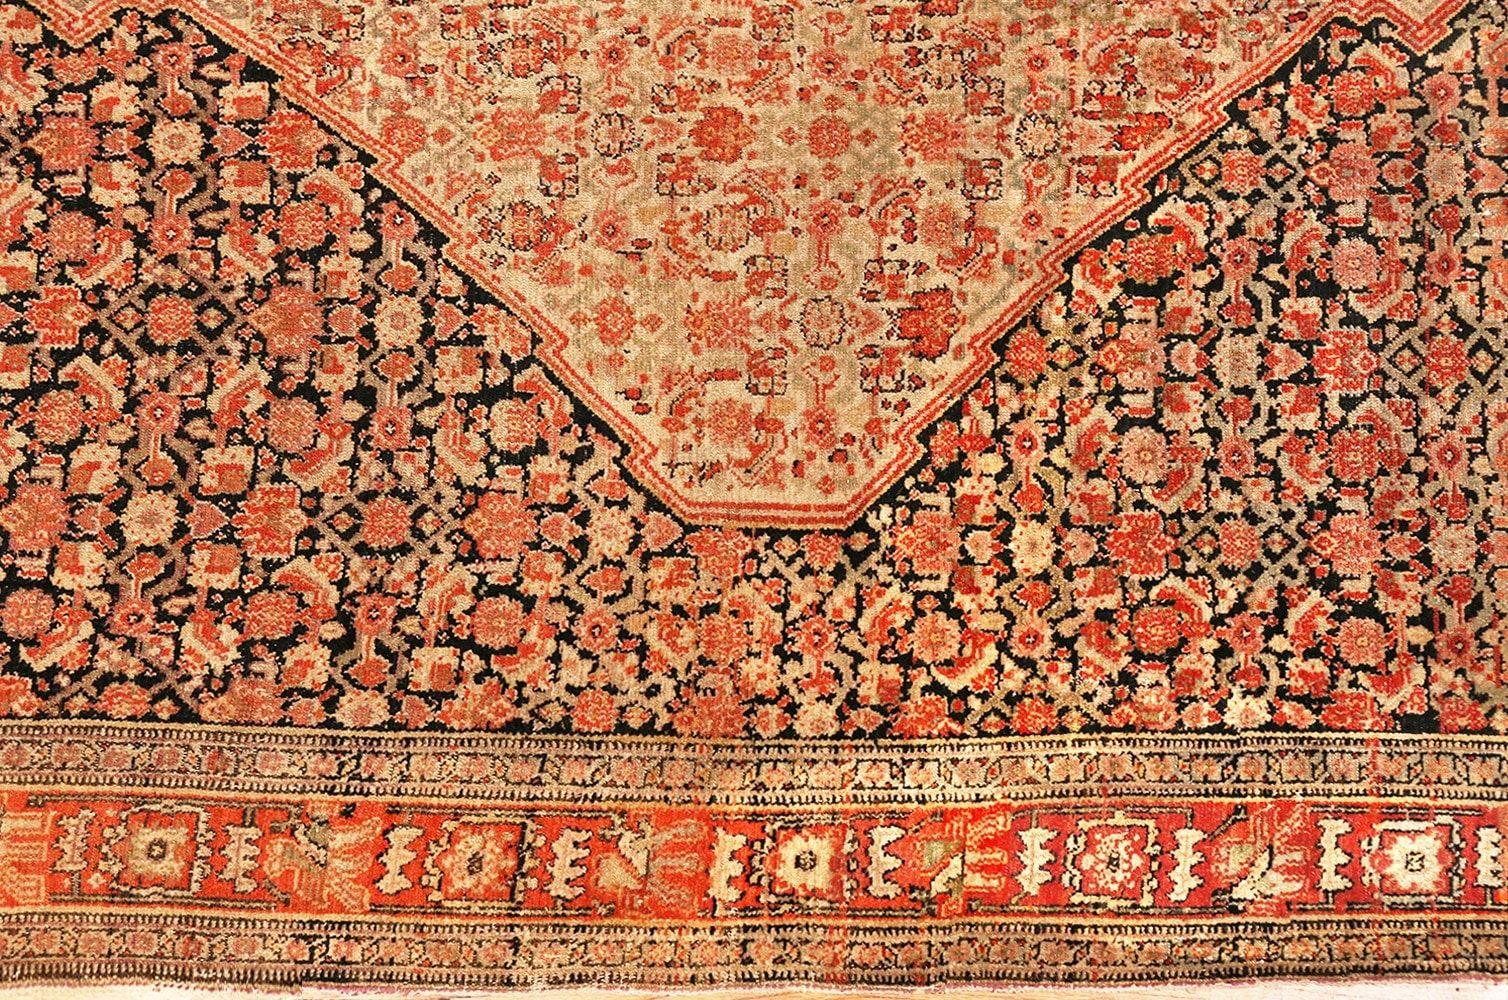 Wool Antique Persian Senneh Runner. Size: 3 ft 10 in x 19 ft 2 in (1.17 m x 5.84 m)